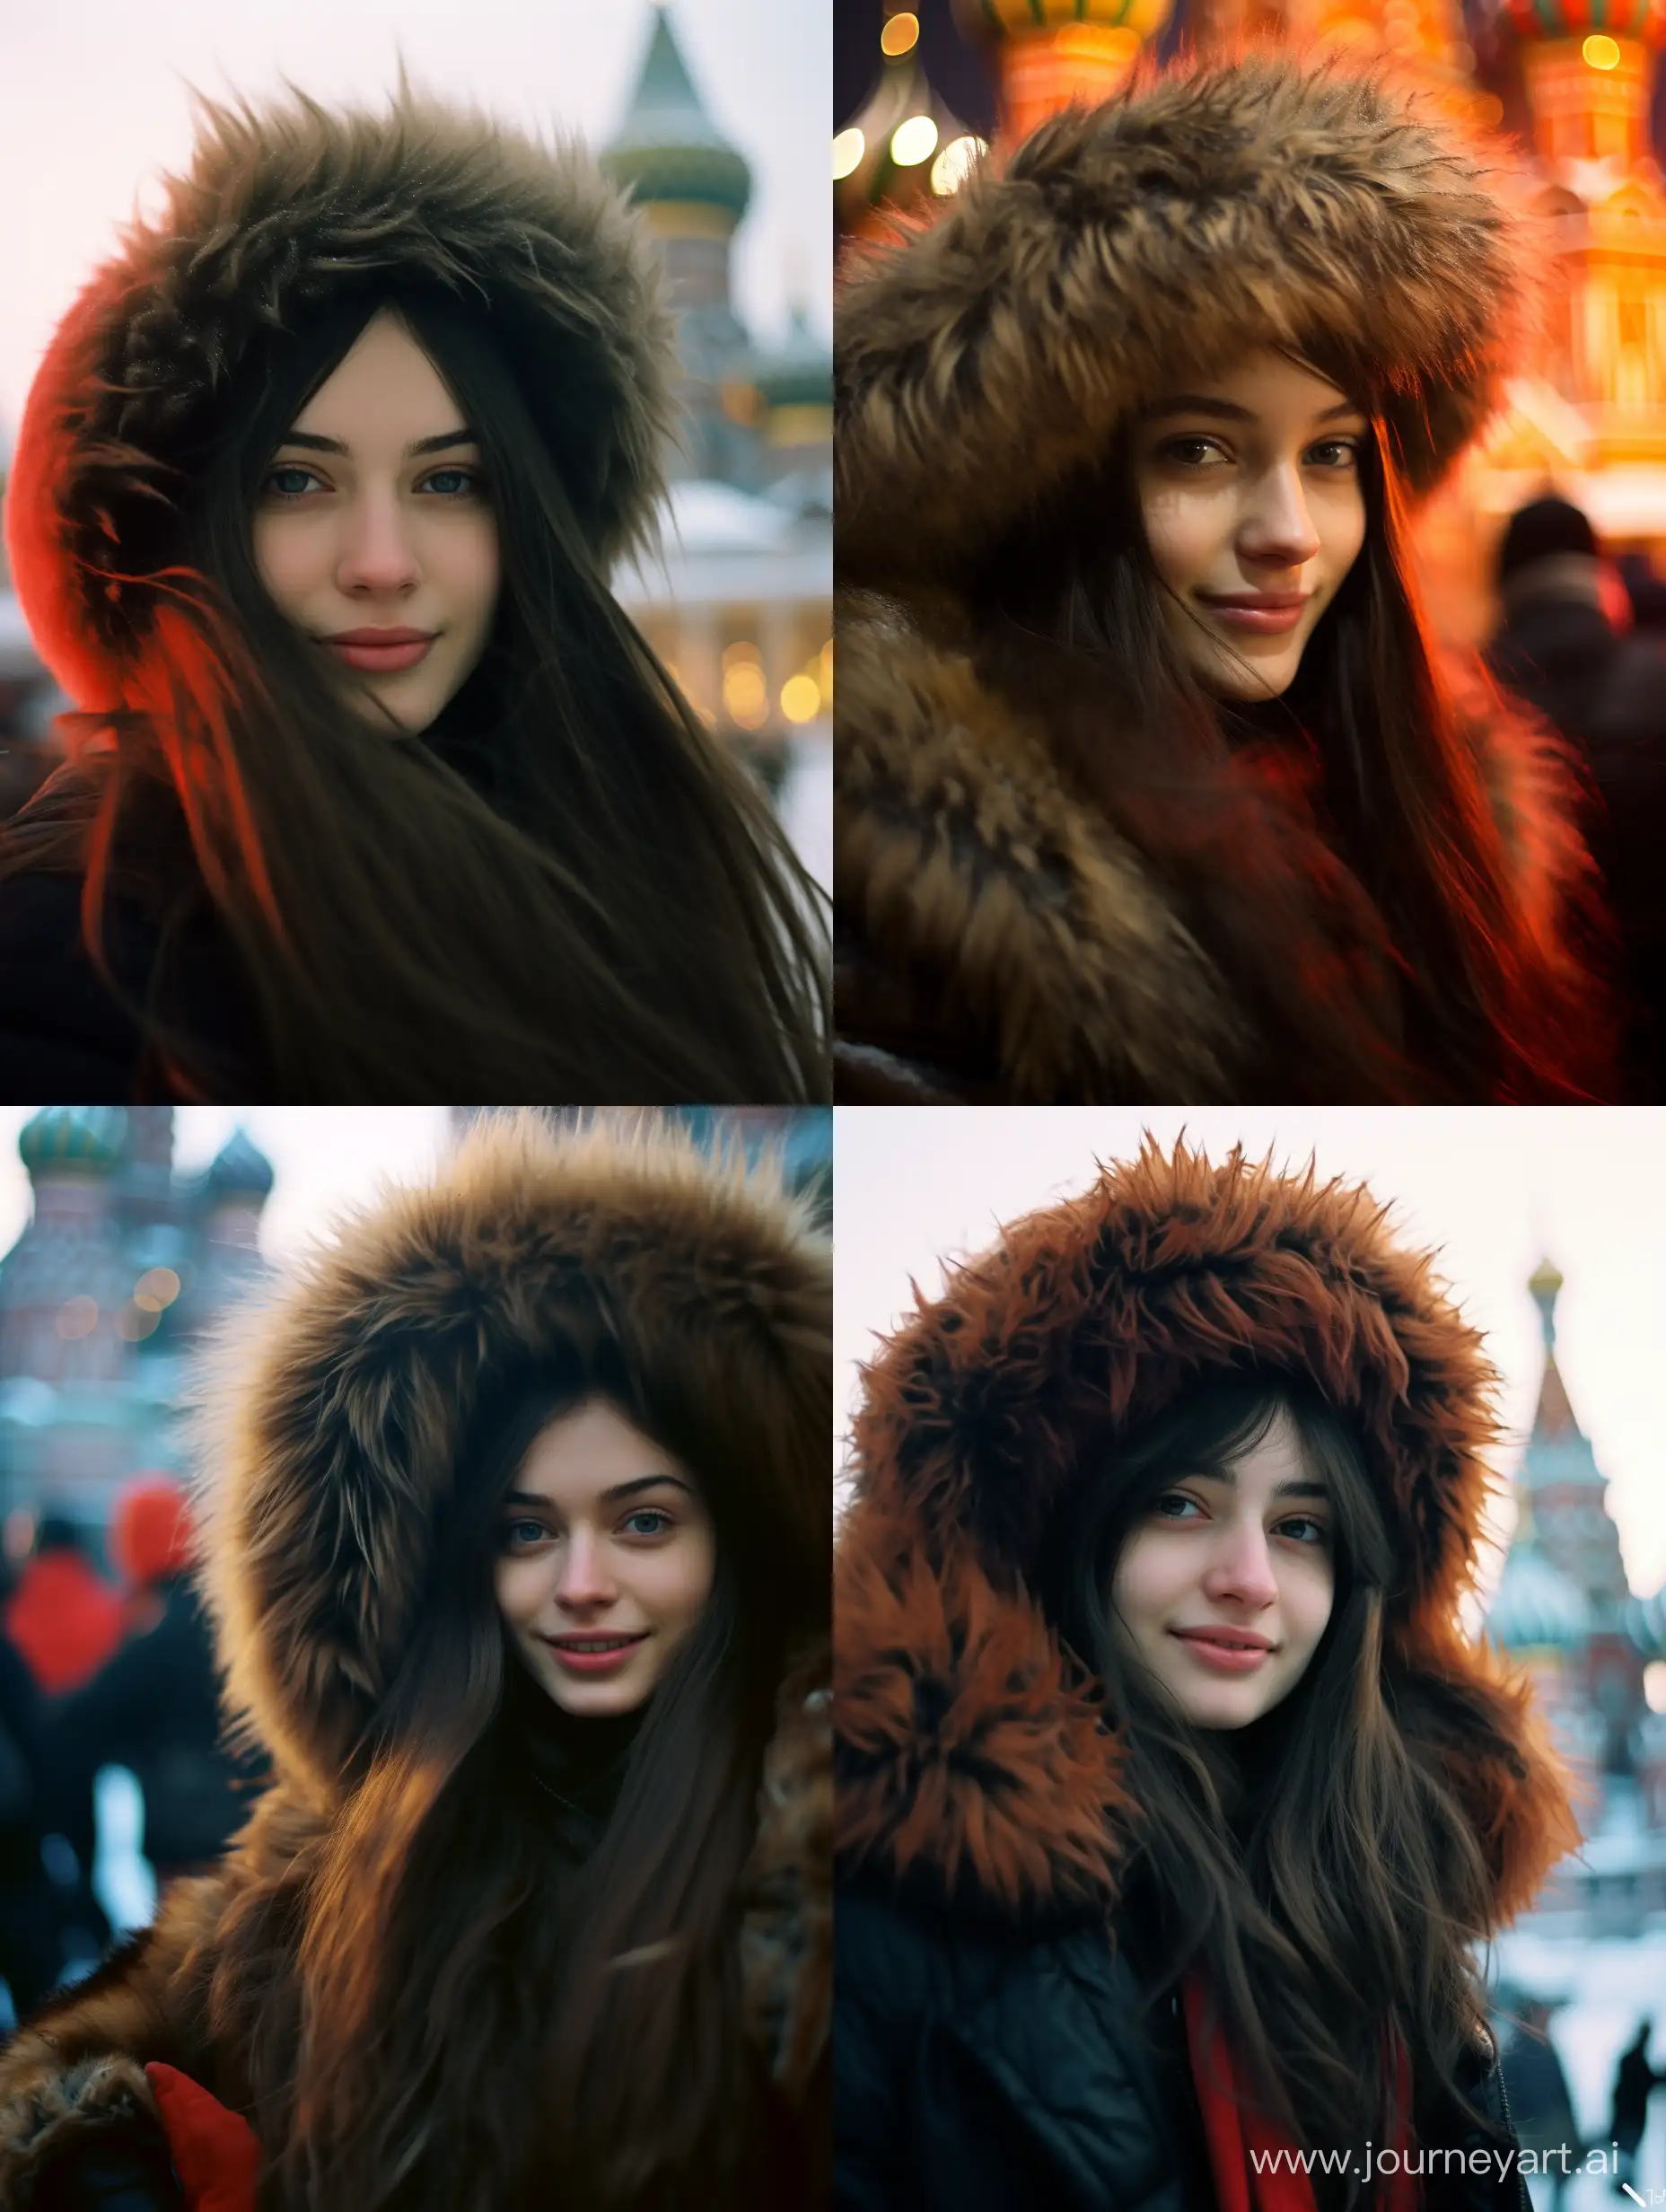 SovietEra-Winter-Elegance-Girl-in-Fur-Hat-and-Mink-Coat-on-Red-Square